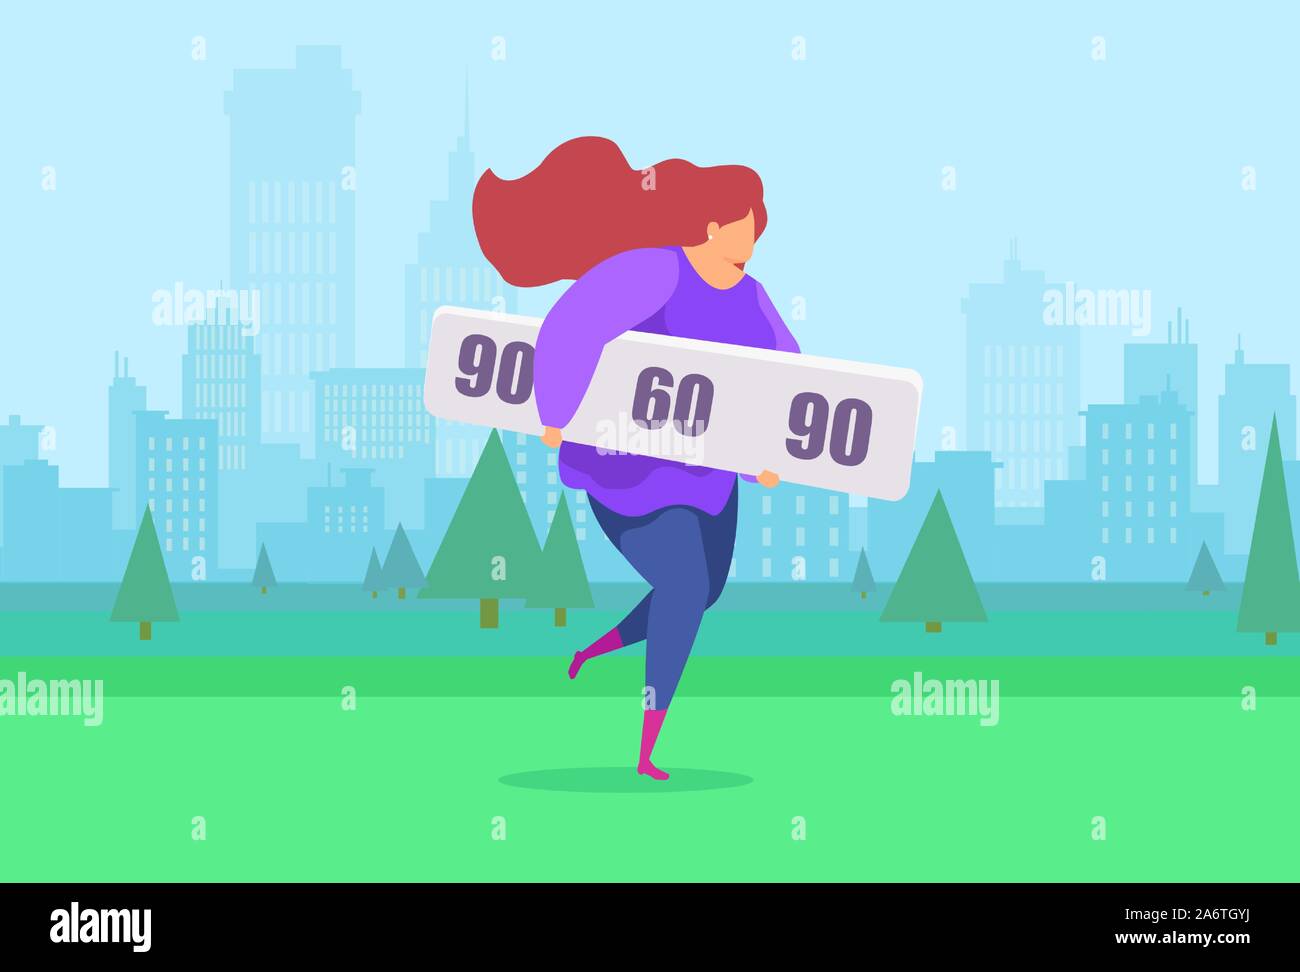 90 Redheads Yoga Pants Images, Stock Photos, 3D objects, & Vectors